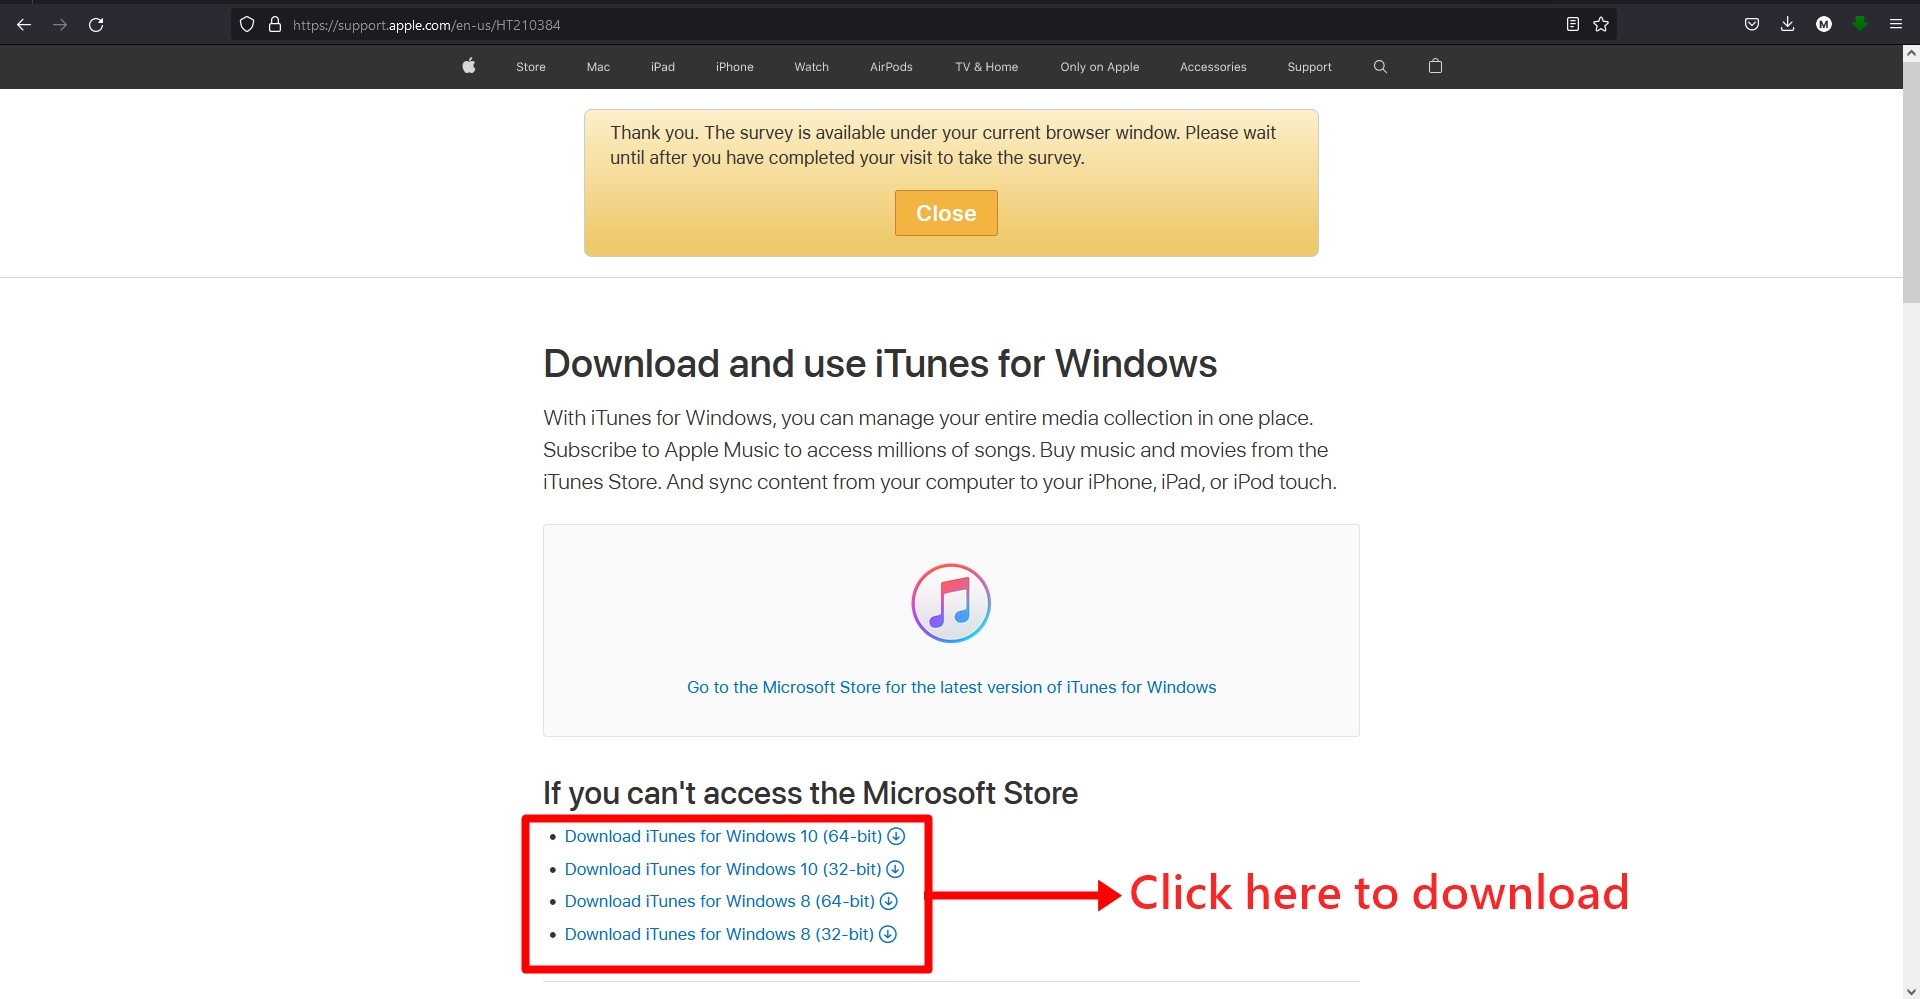 Install iTunes on your PC